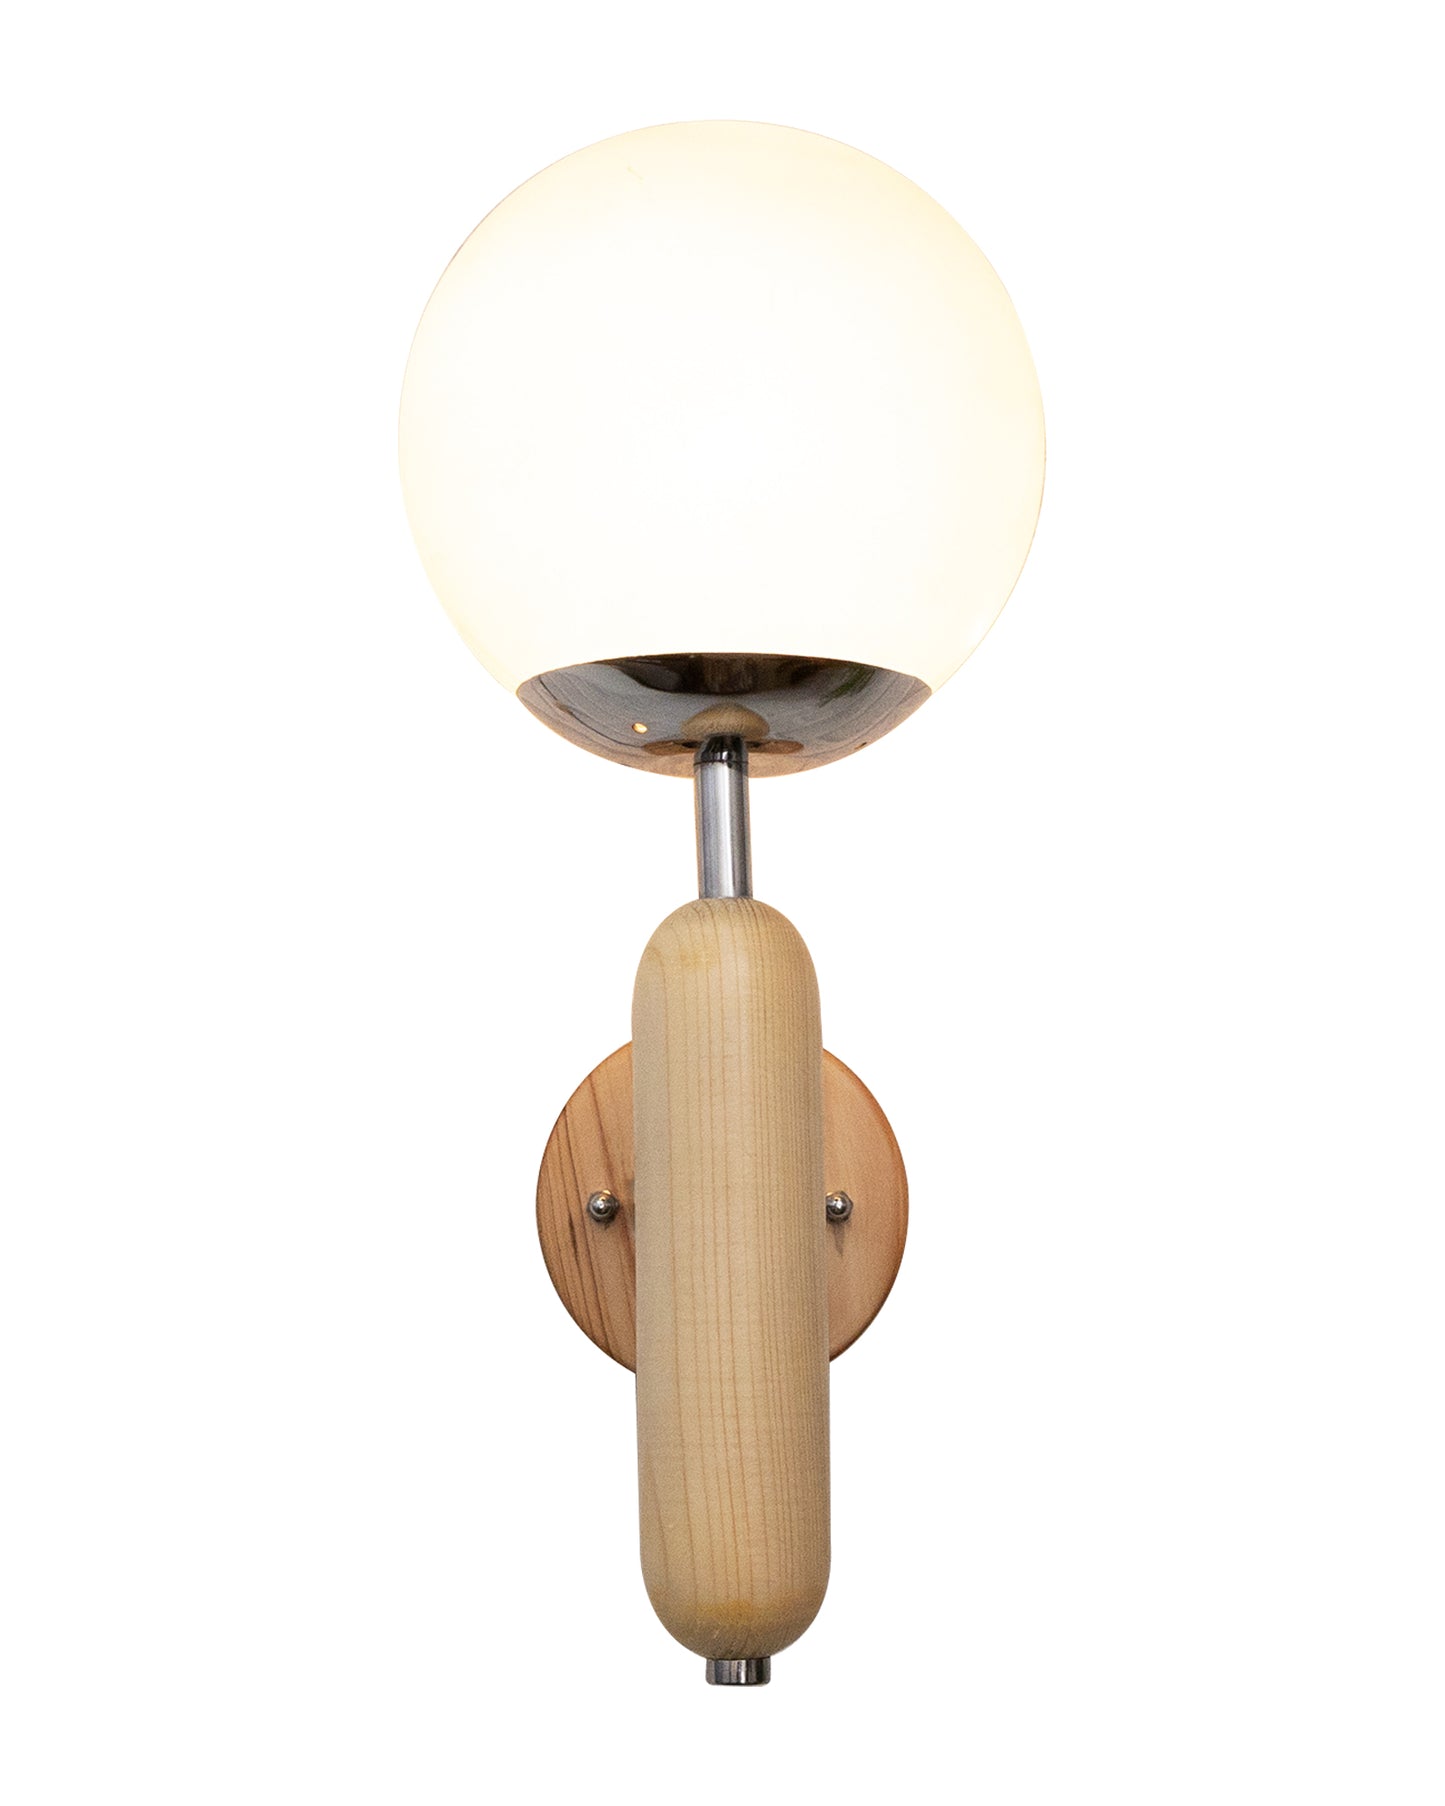 Wood Bullet Wall Lamp with chrome finish, lamp white glass globe